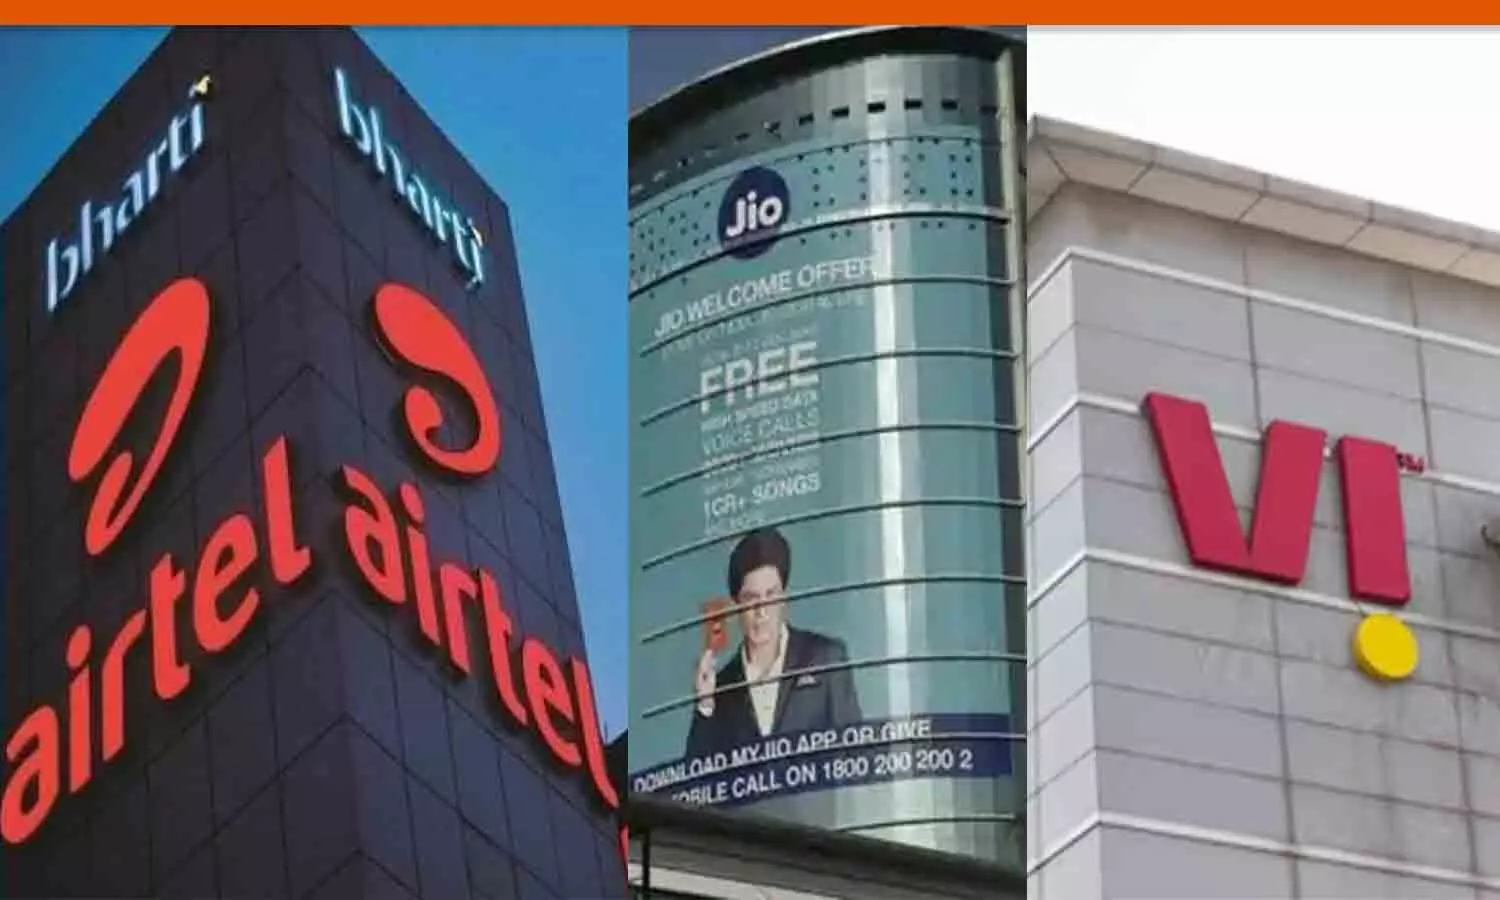 After Jio-Airtel, VI also increased mobile tariffs